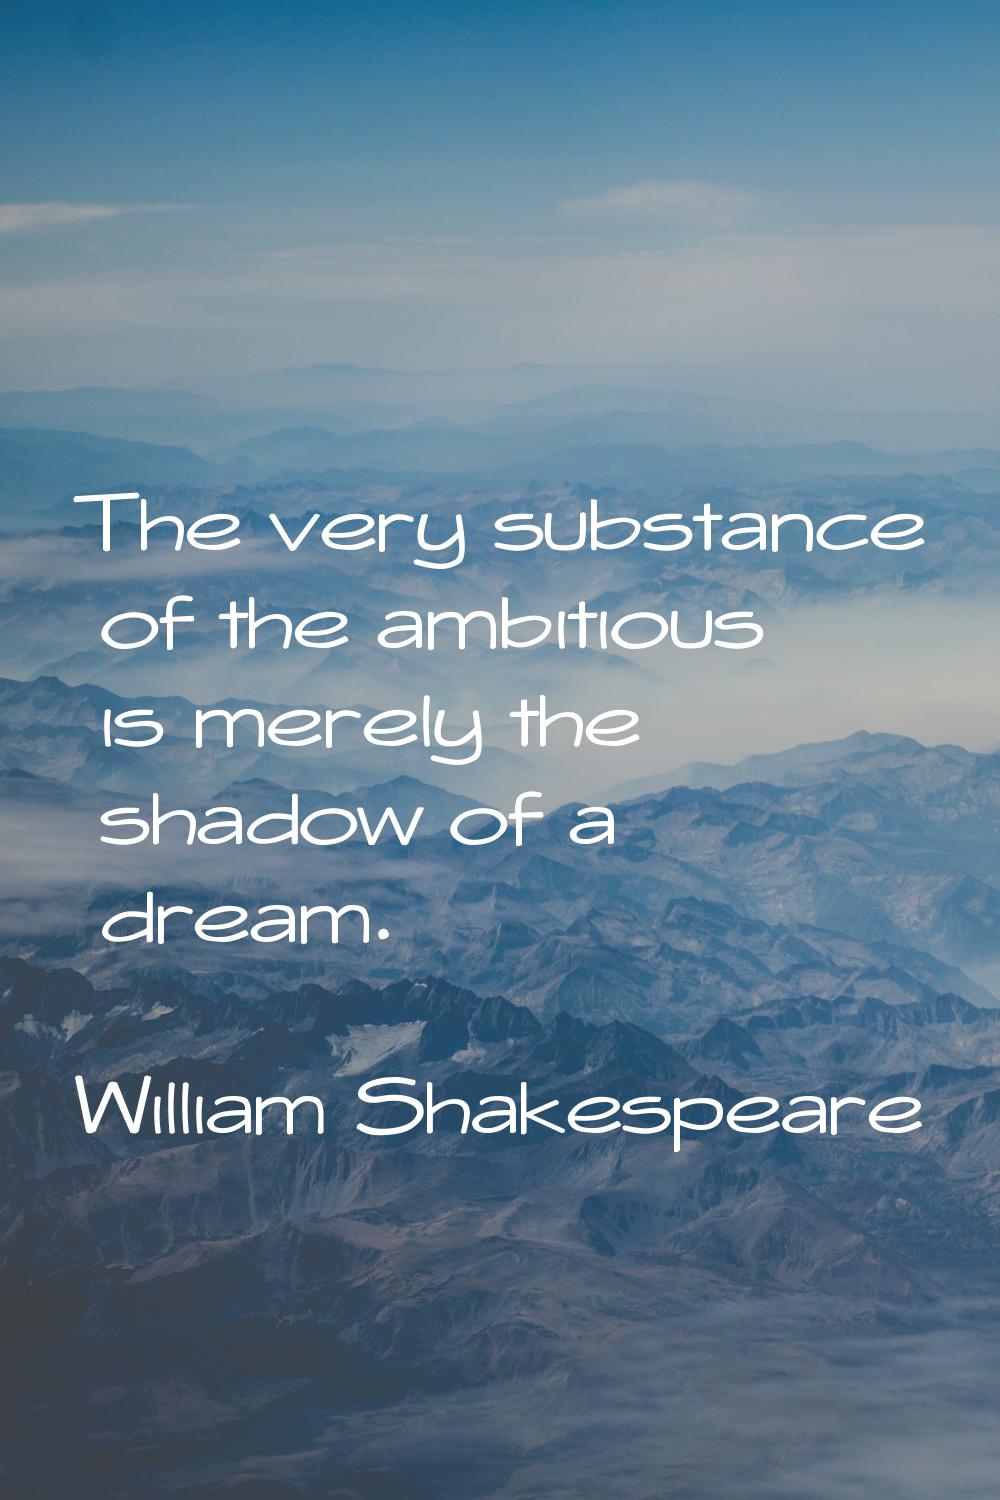 The very substance of the ambitious is merely the shadow of a dream.